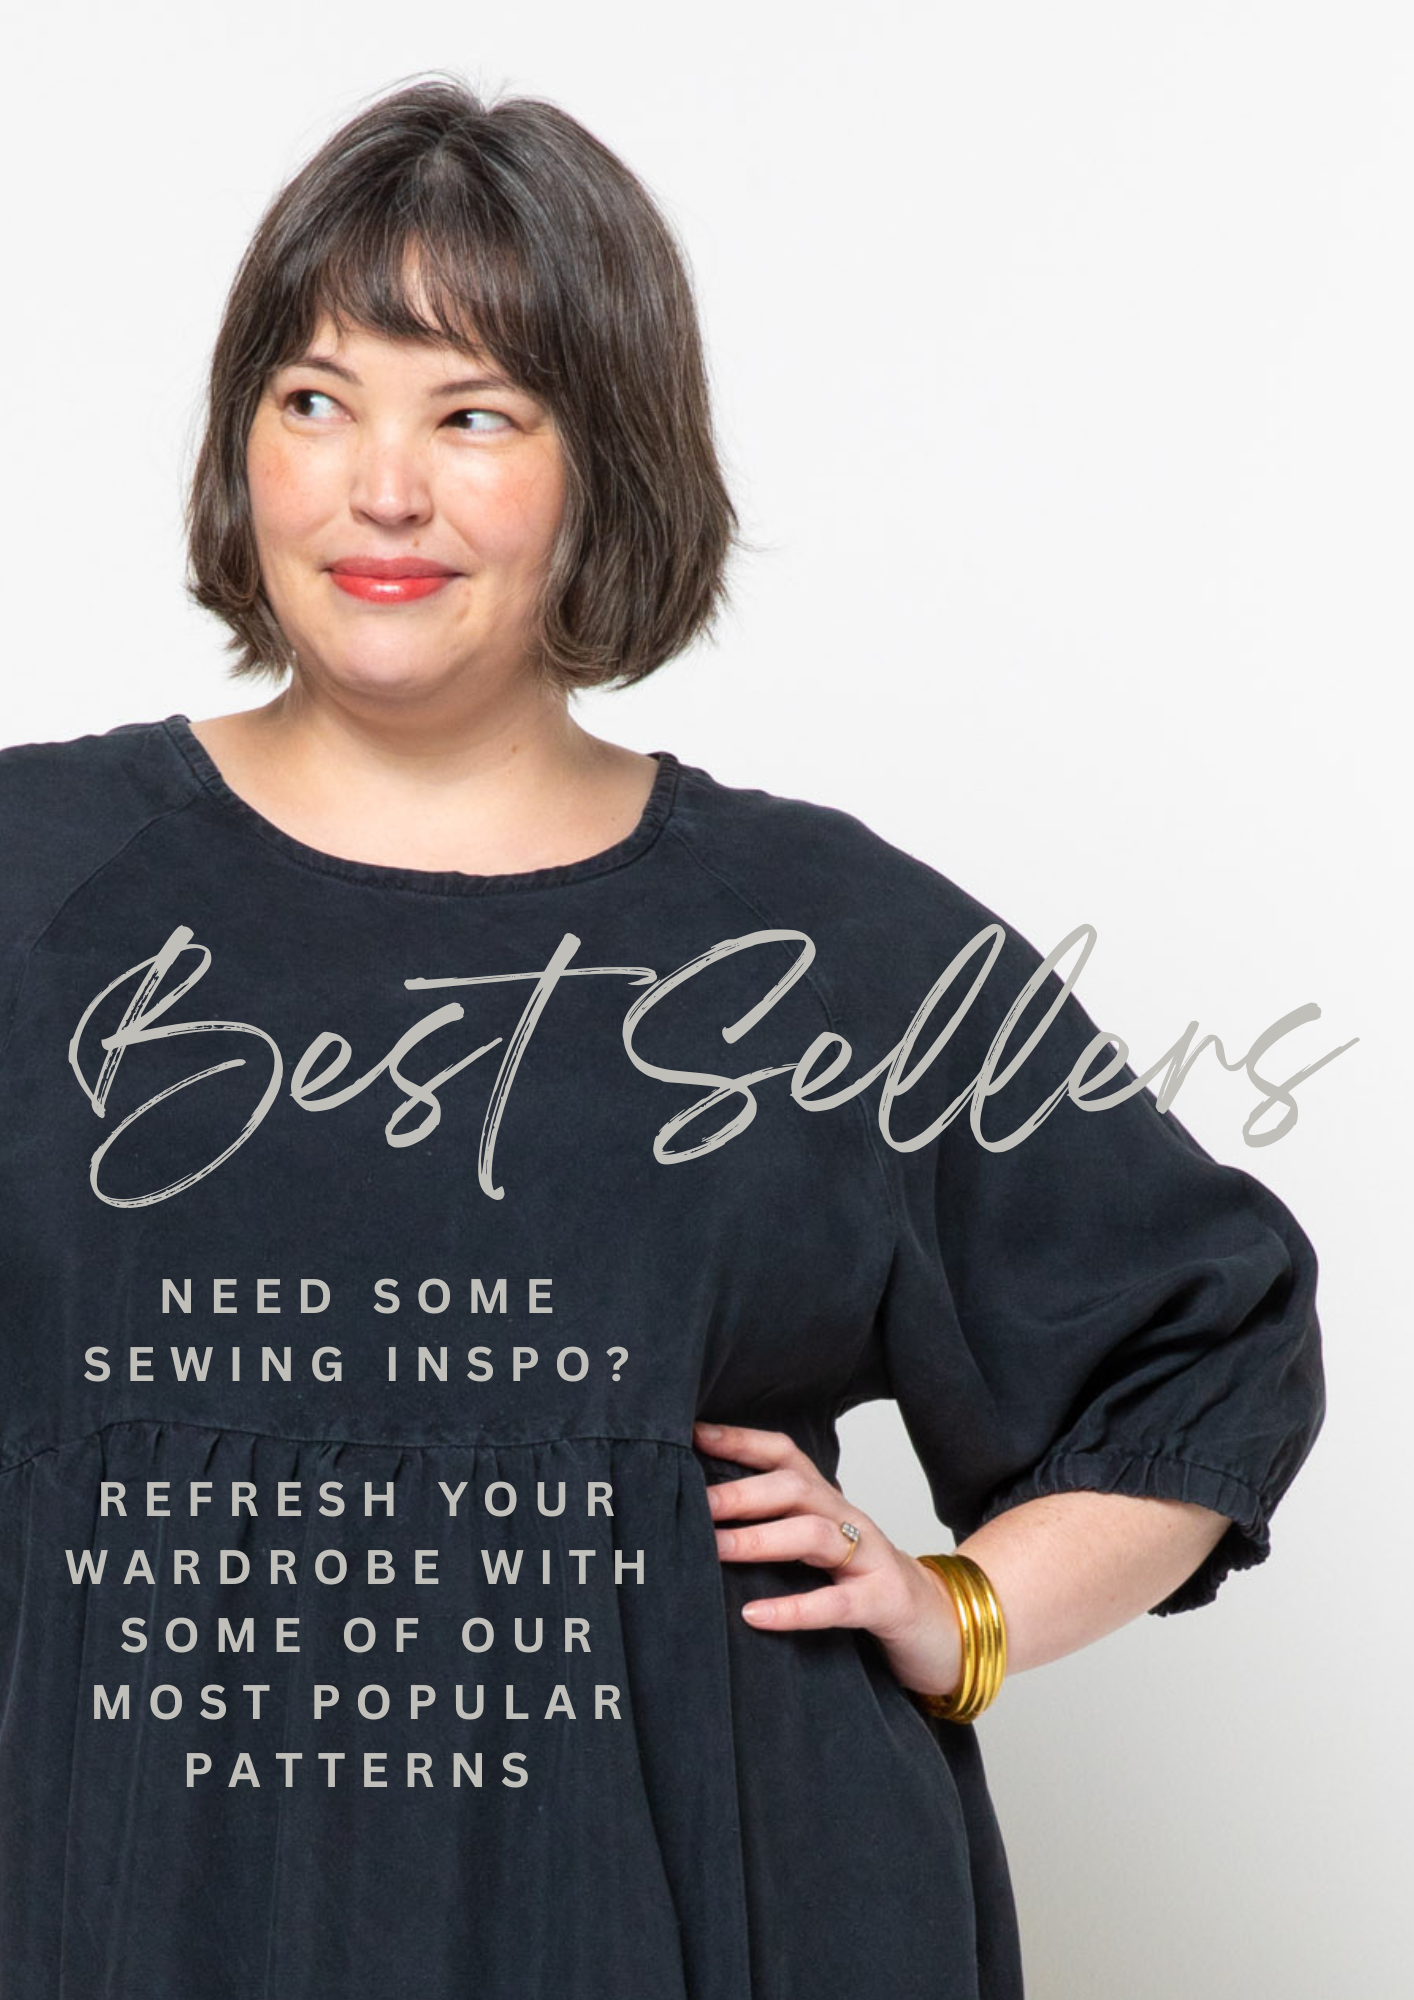 Need some sewing inspo? Here are a few of our best selling patterns